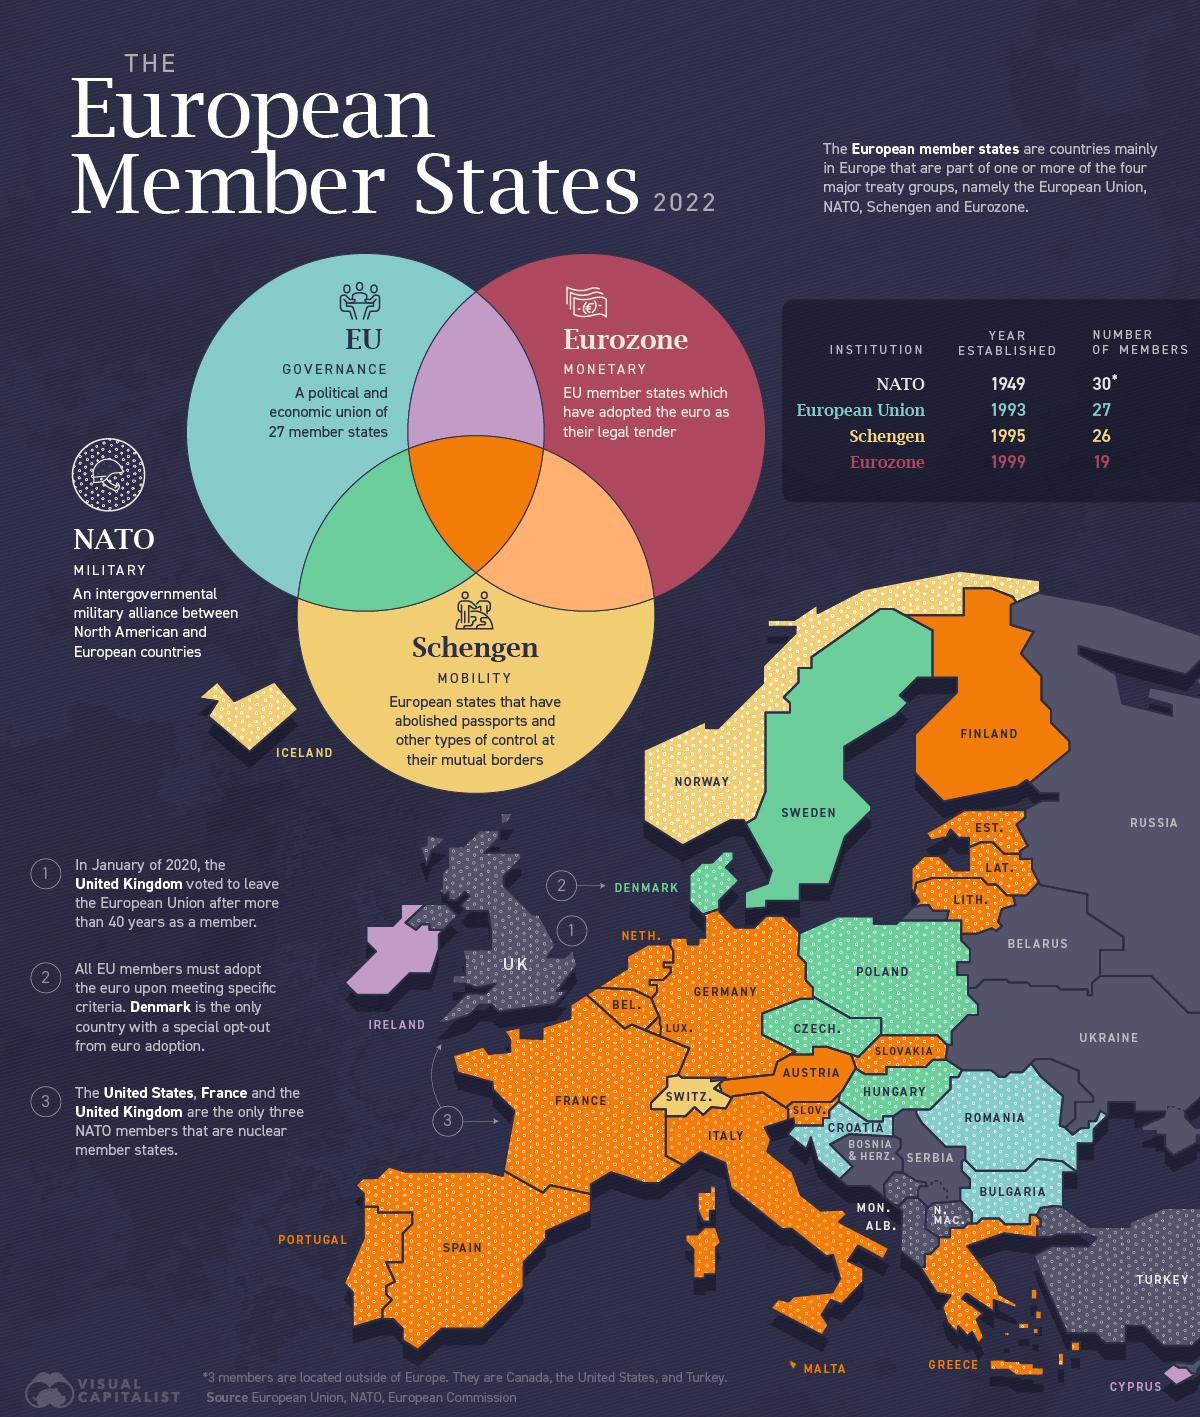 Who are Europe’s Member States?